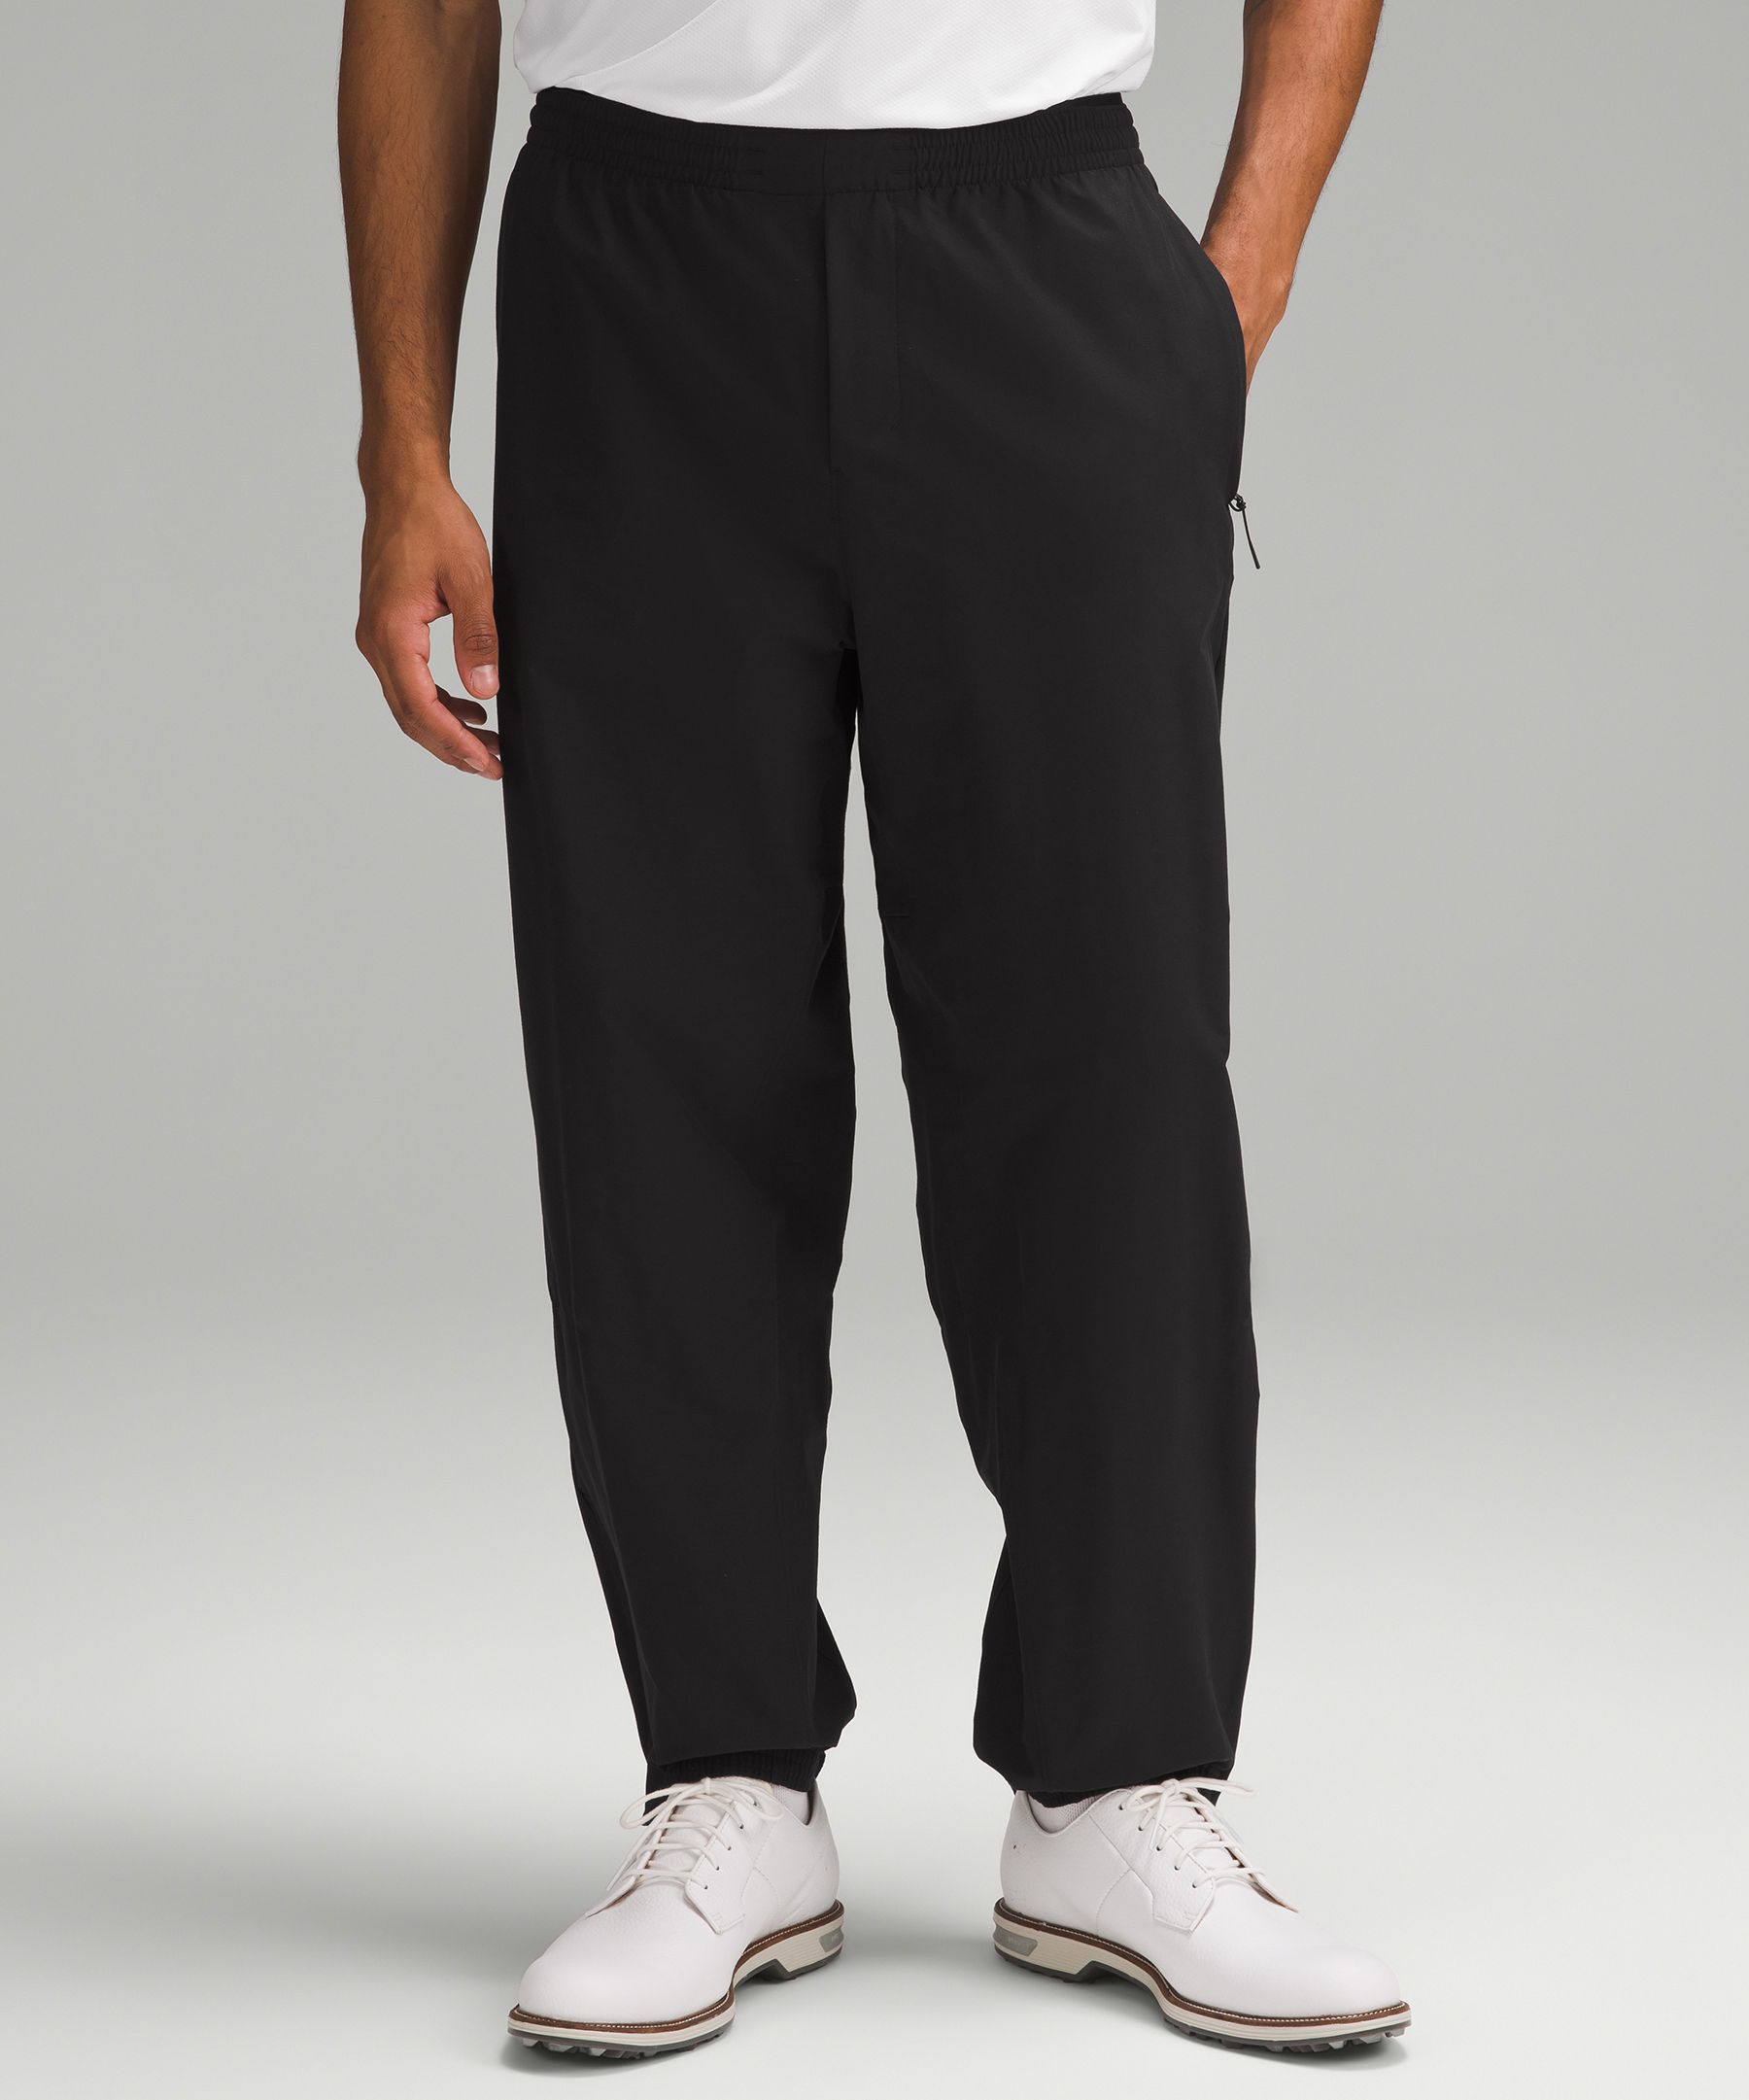 Lululemon athletica Water-Repellent Pull-On Golf Pant